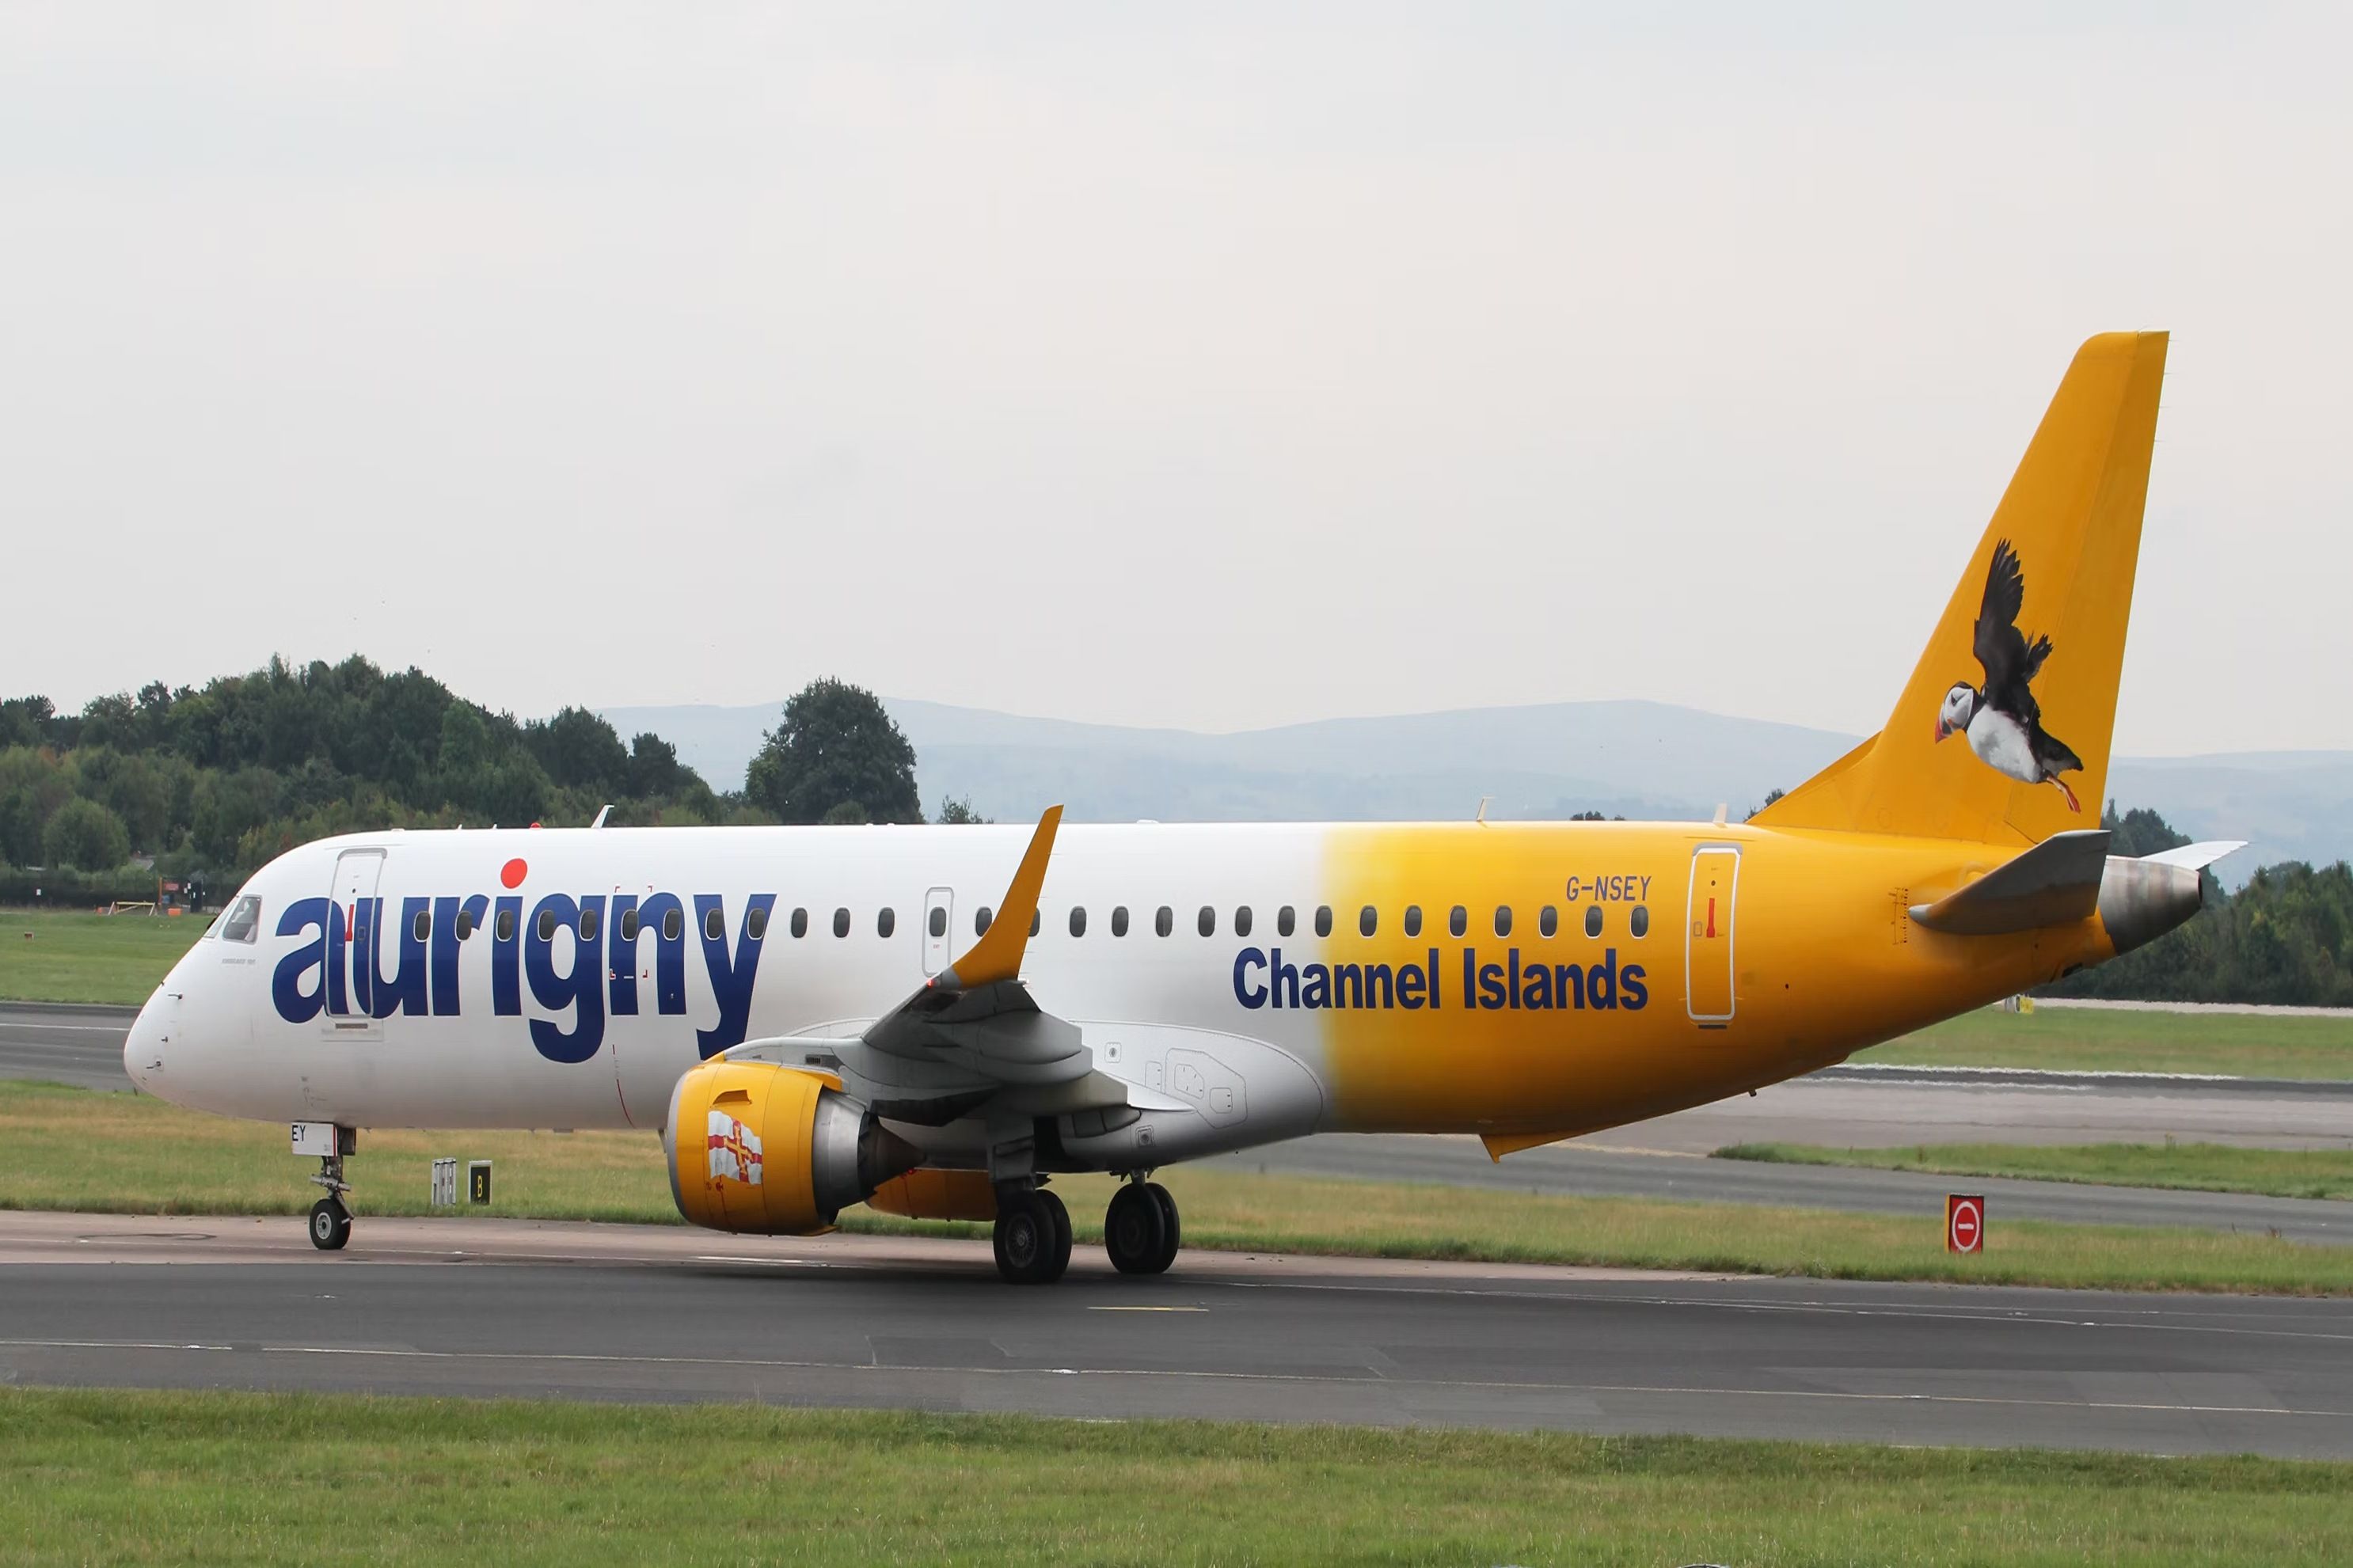 Aurigny Air Services' Embraer ERJ 195 aircraft on the runway.